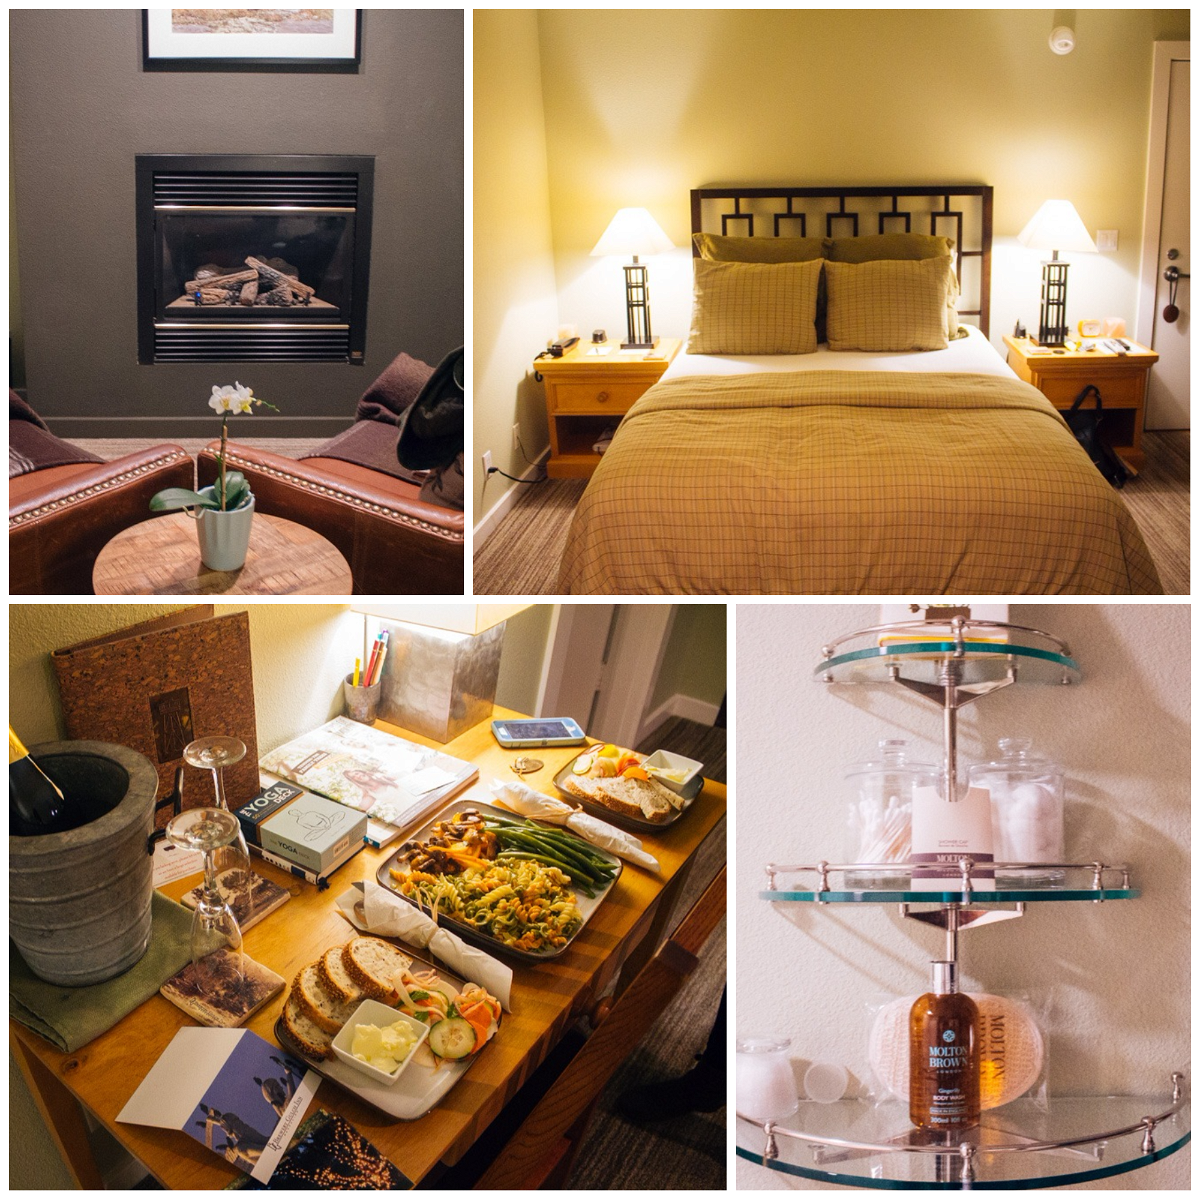 where to stay in mendocino? Brewery Gulch Inn is a great options for Mendocino accommodation